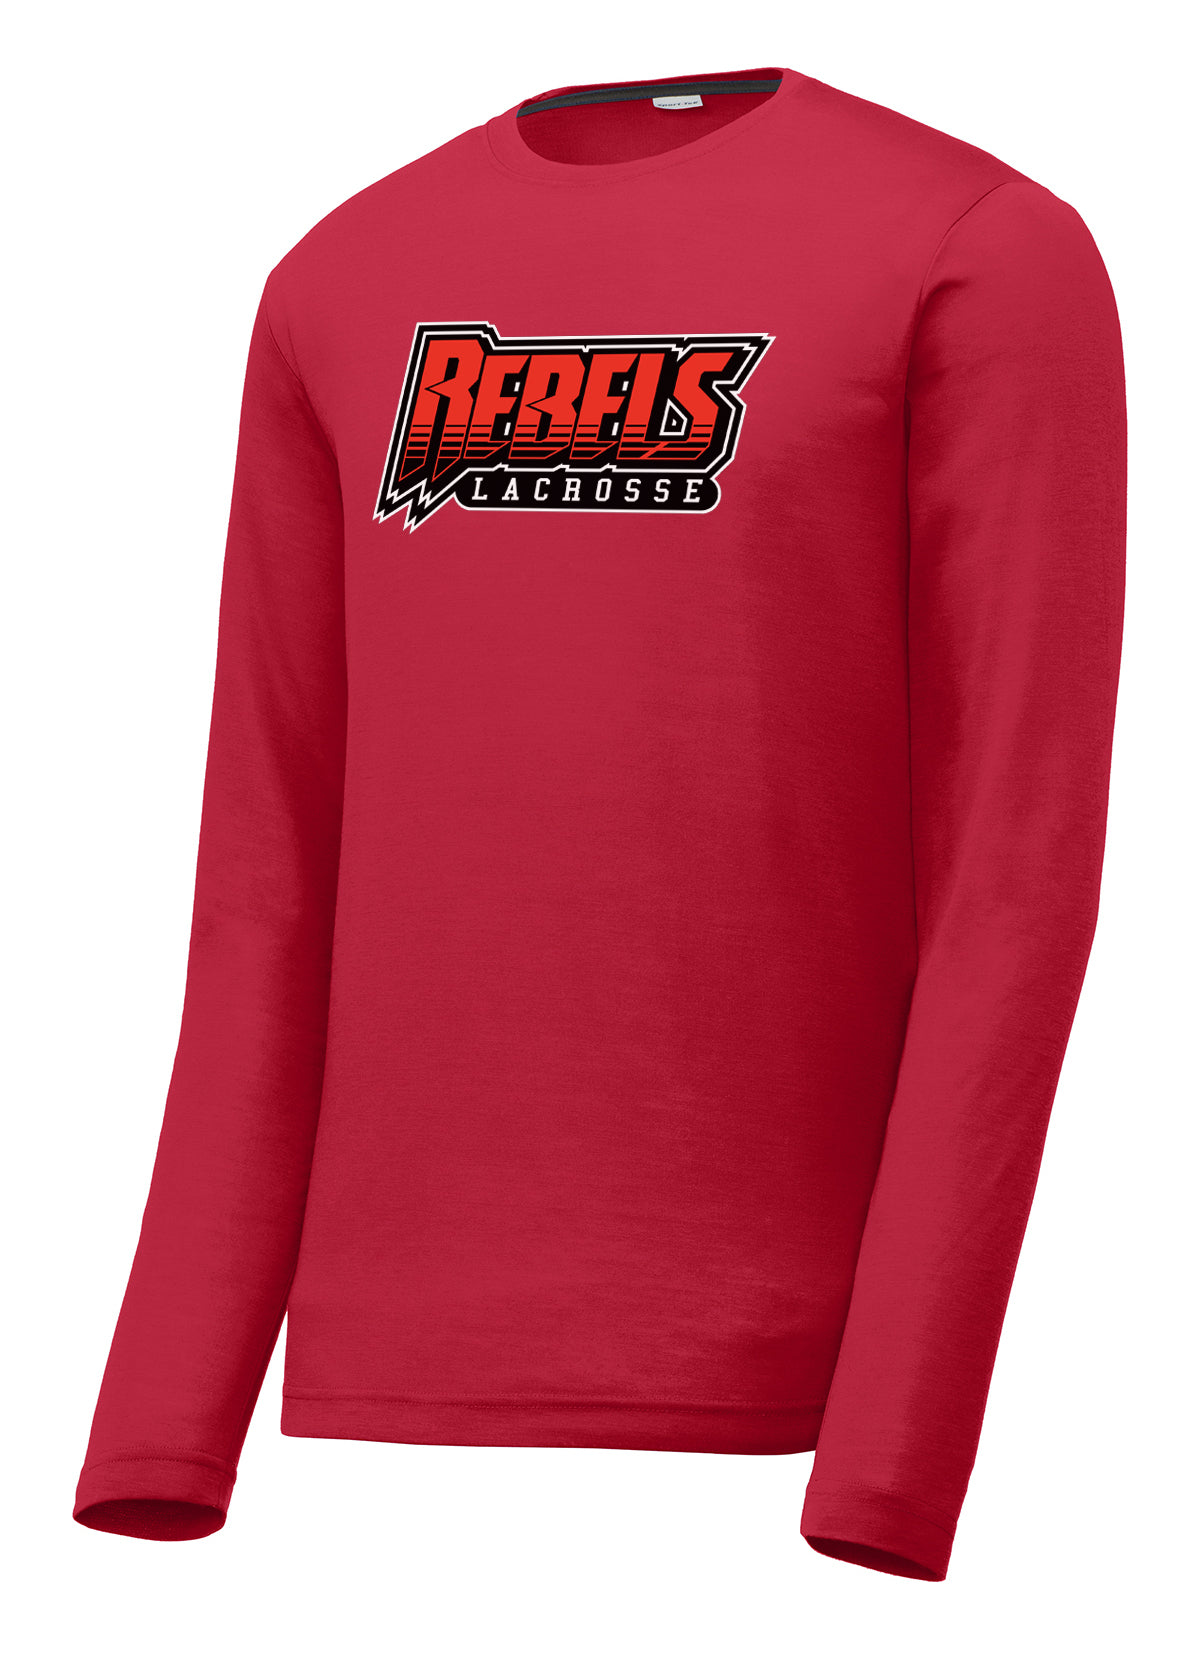 Rebels Lacrosse Red Long Sleeve CottonTouch Performance Shirt